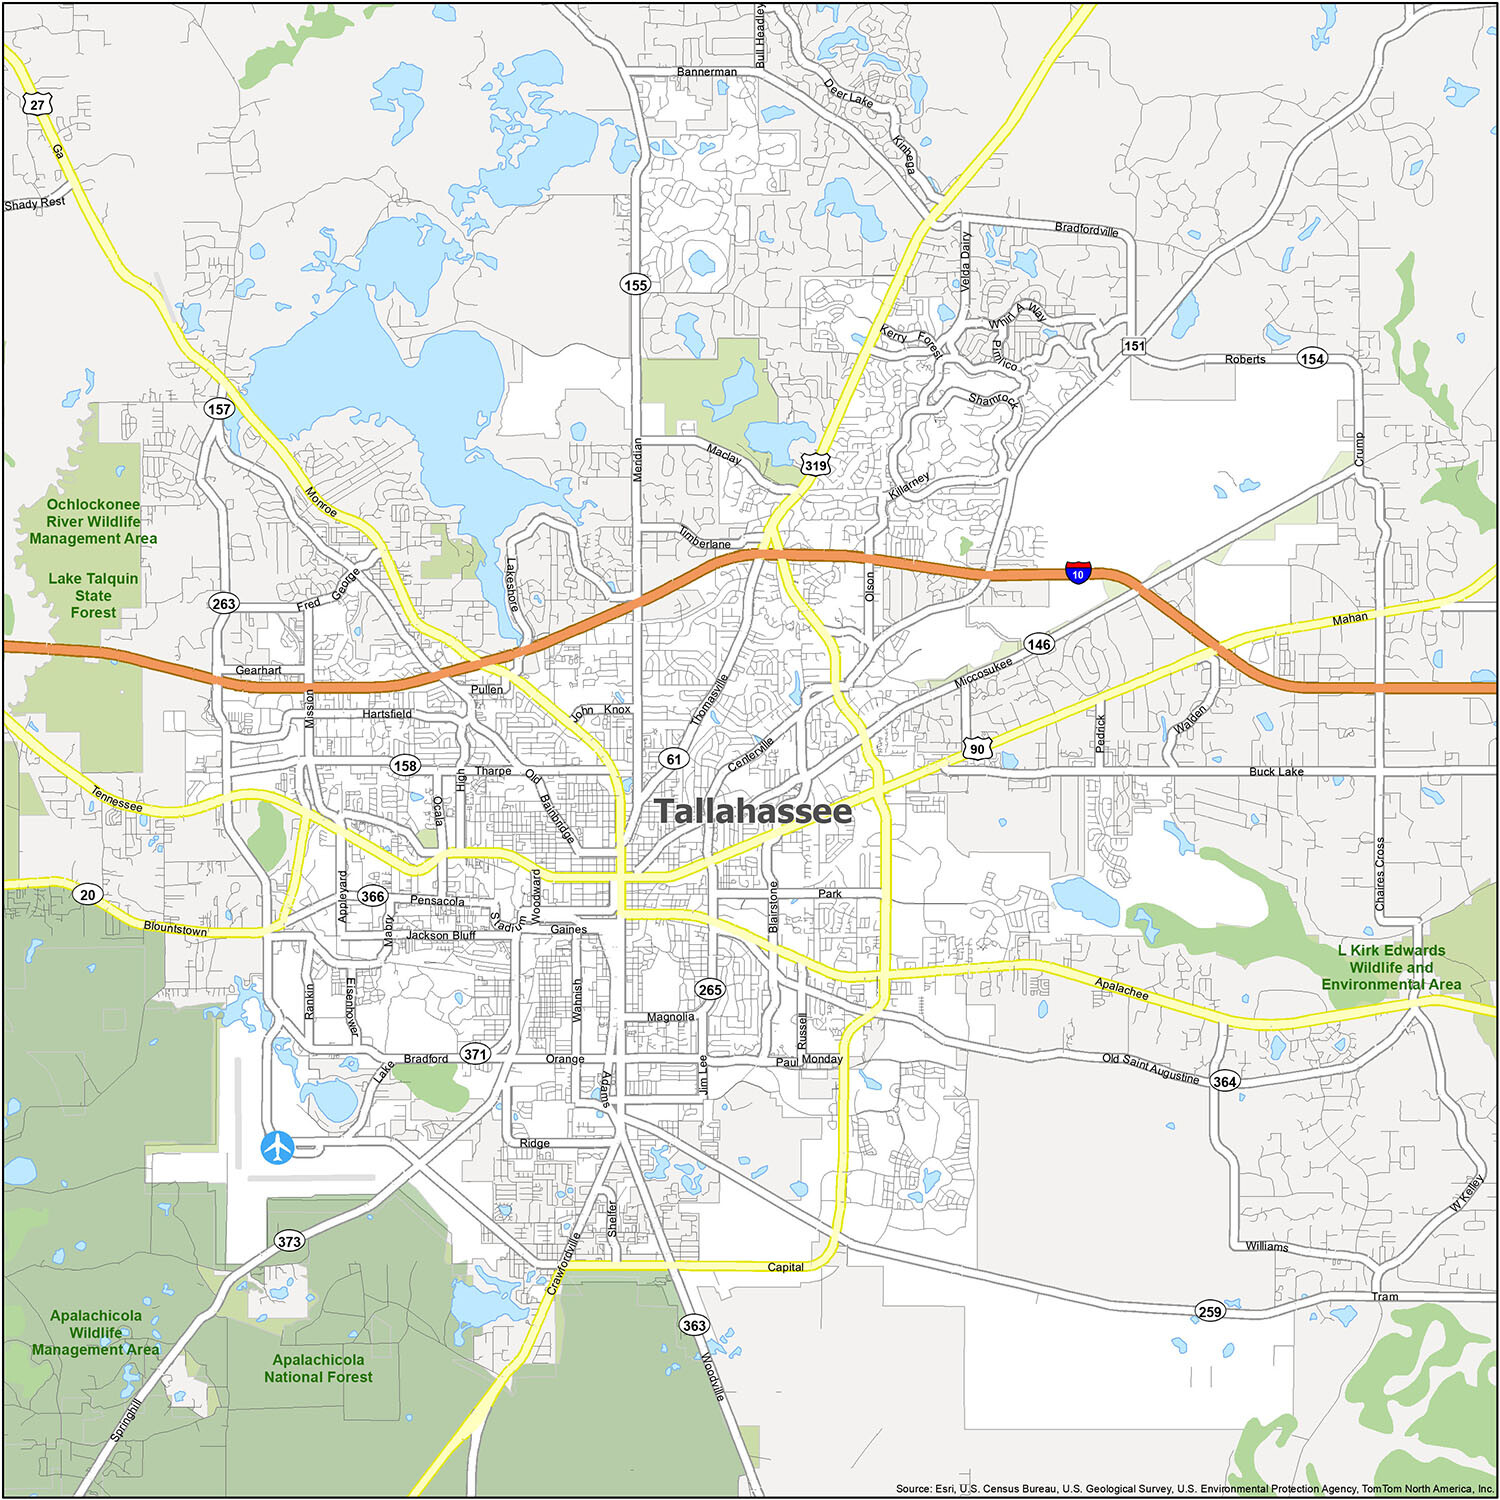 https://gisgeography.com/wp-content/uploads/2020/06/Tallahassee-Road-Map.jpg